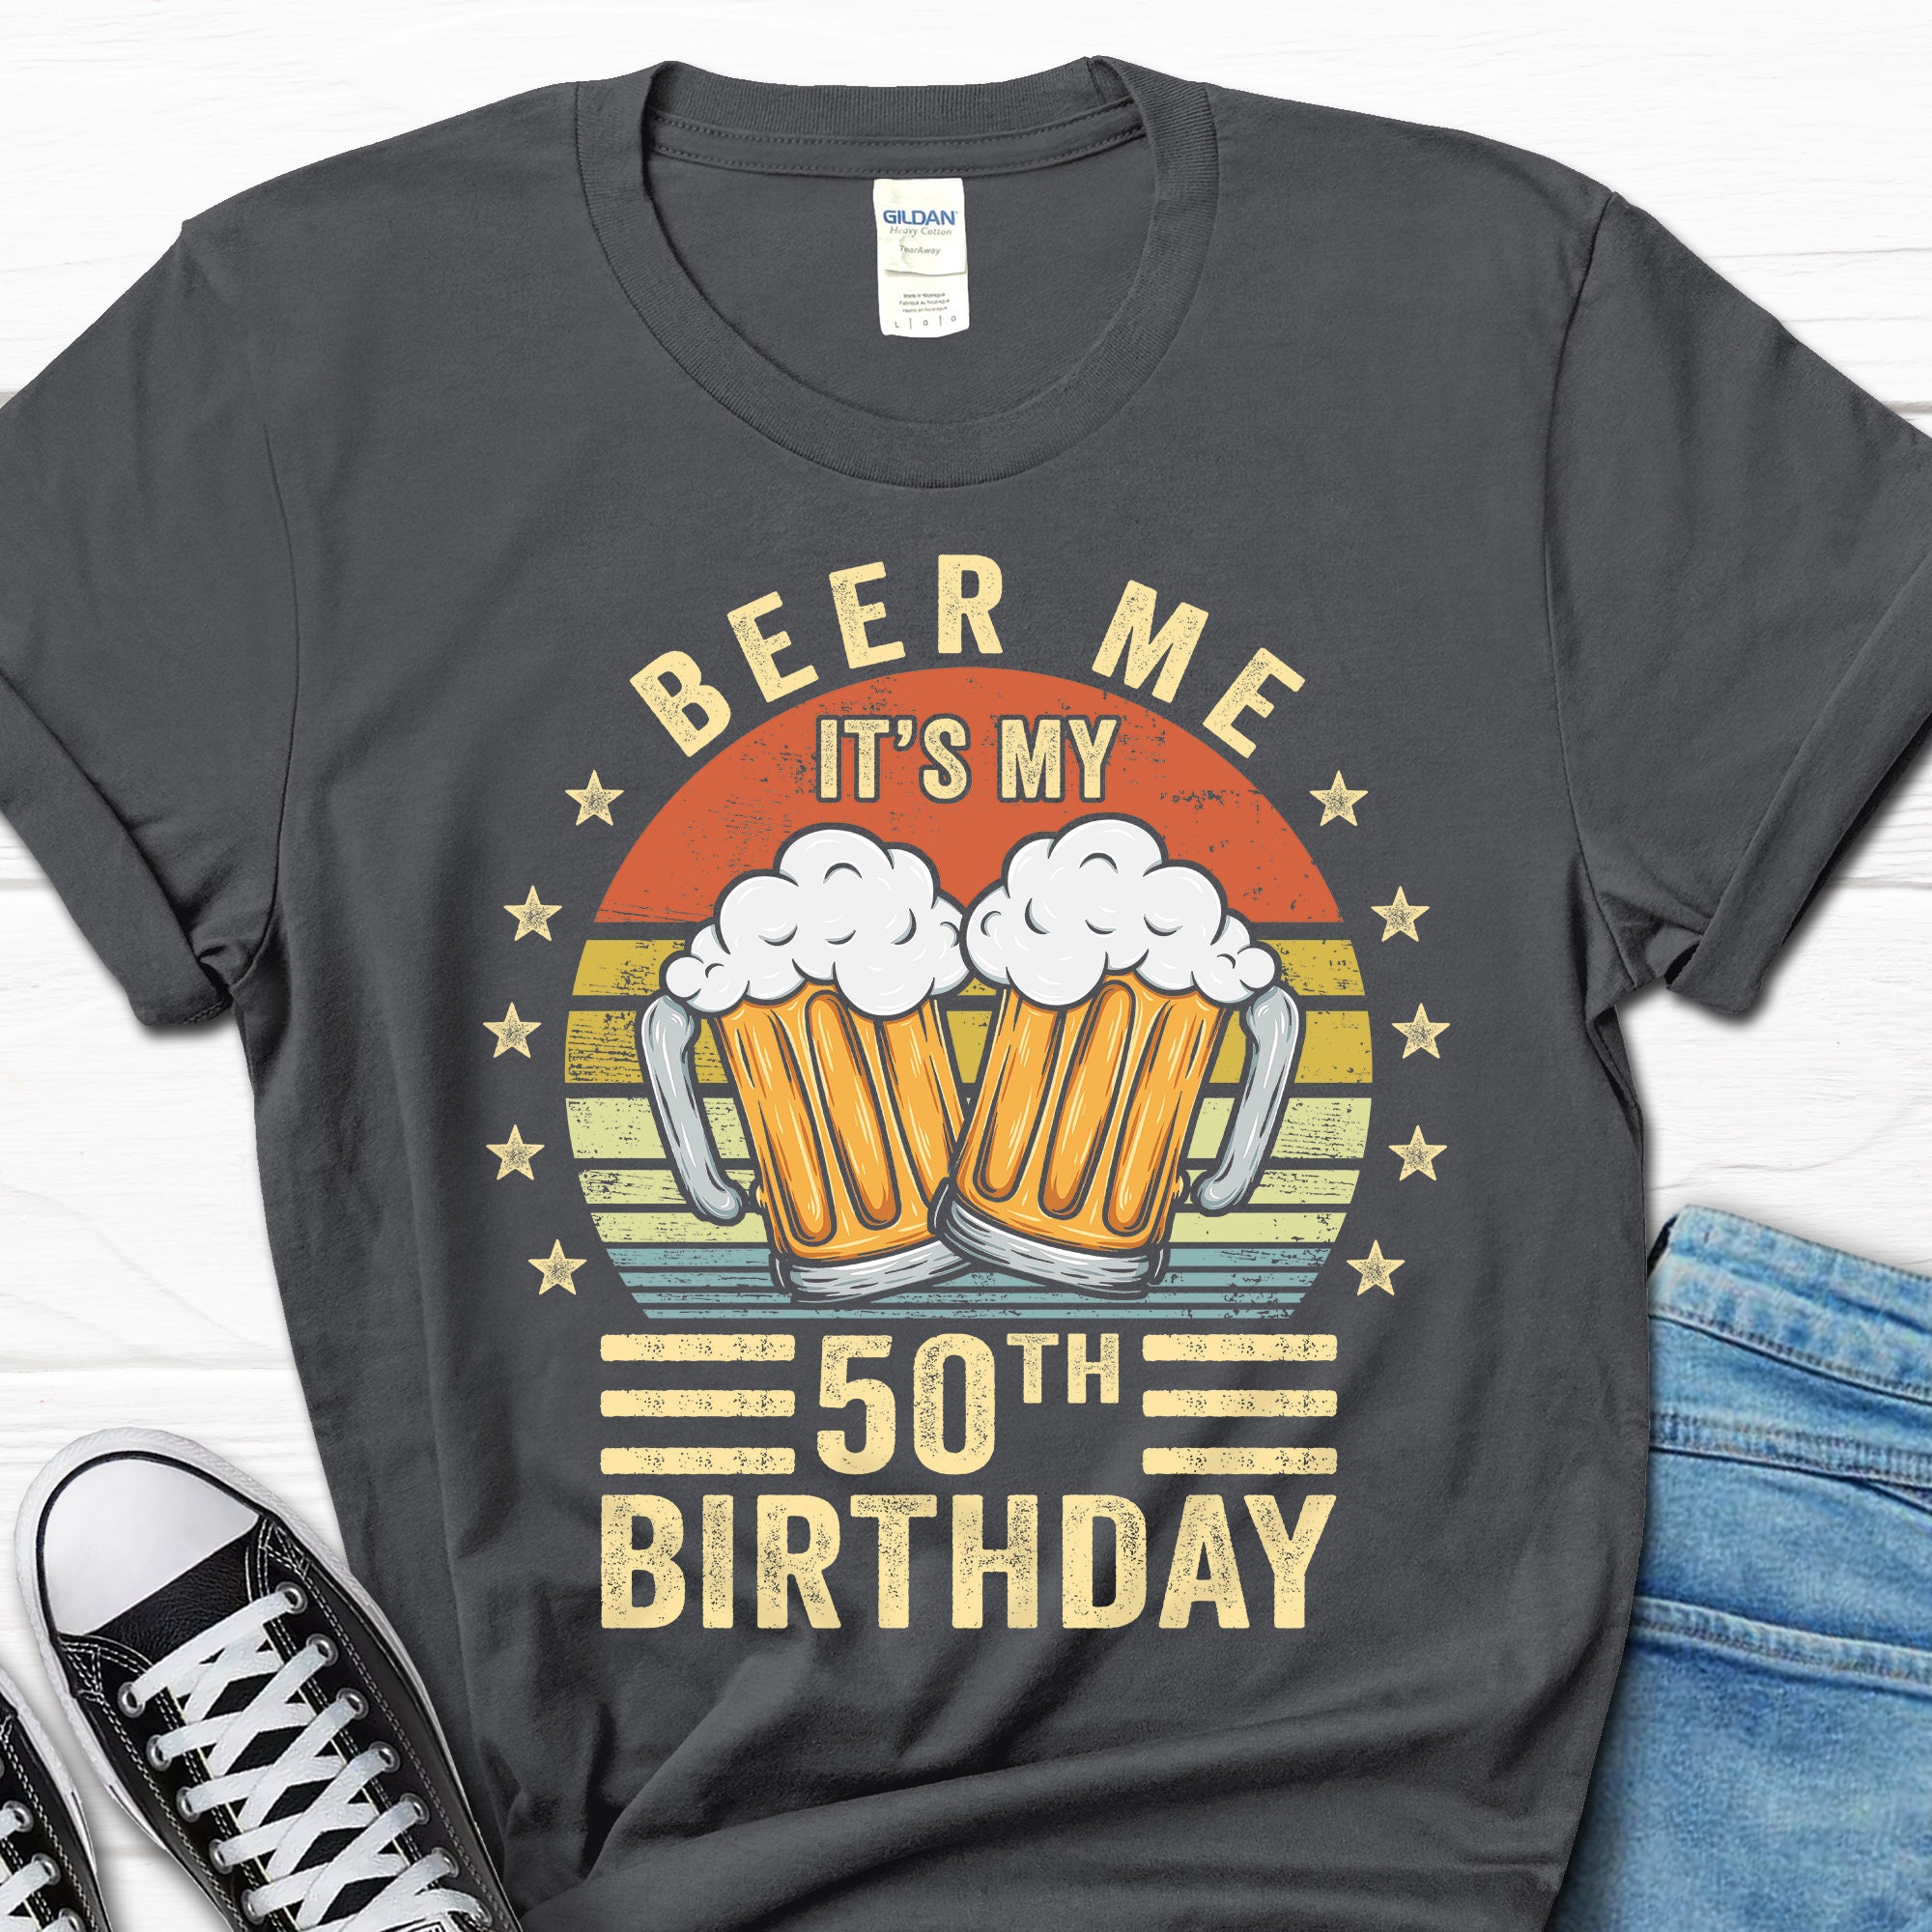 Discover Beer Me It's My 50th Birthday Shirt, 50th Birthday Vintage Gift, 50 Birthday T-Shirt